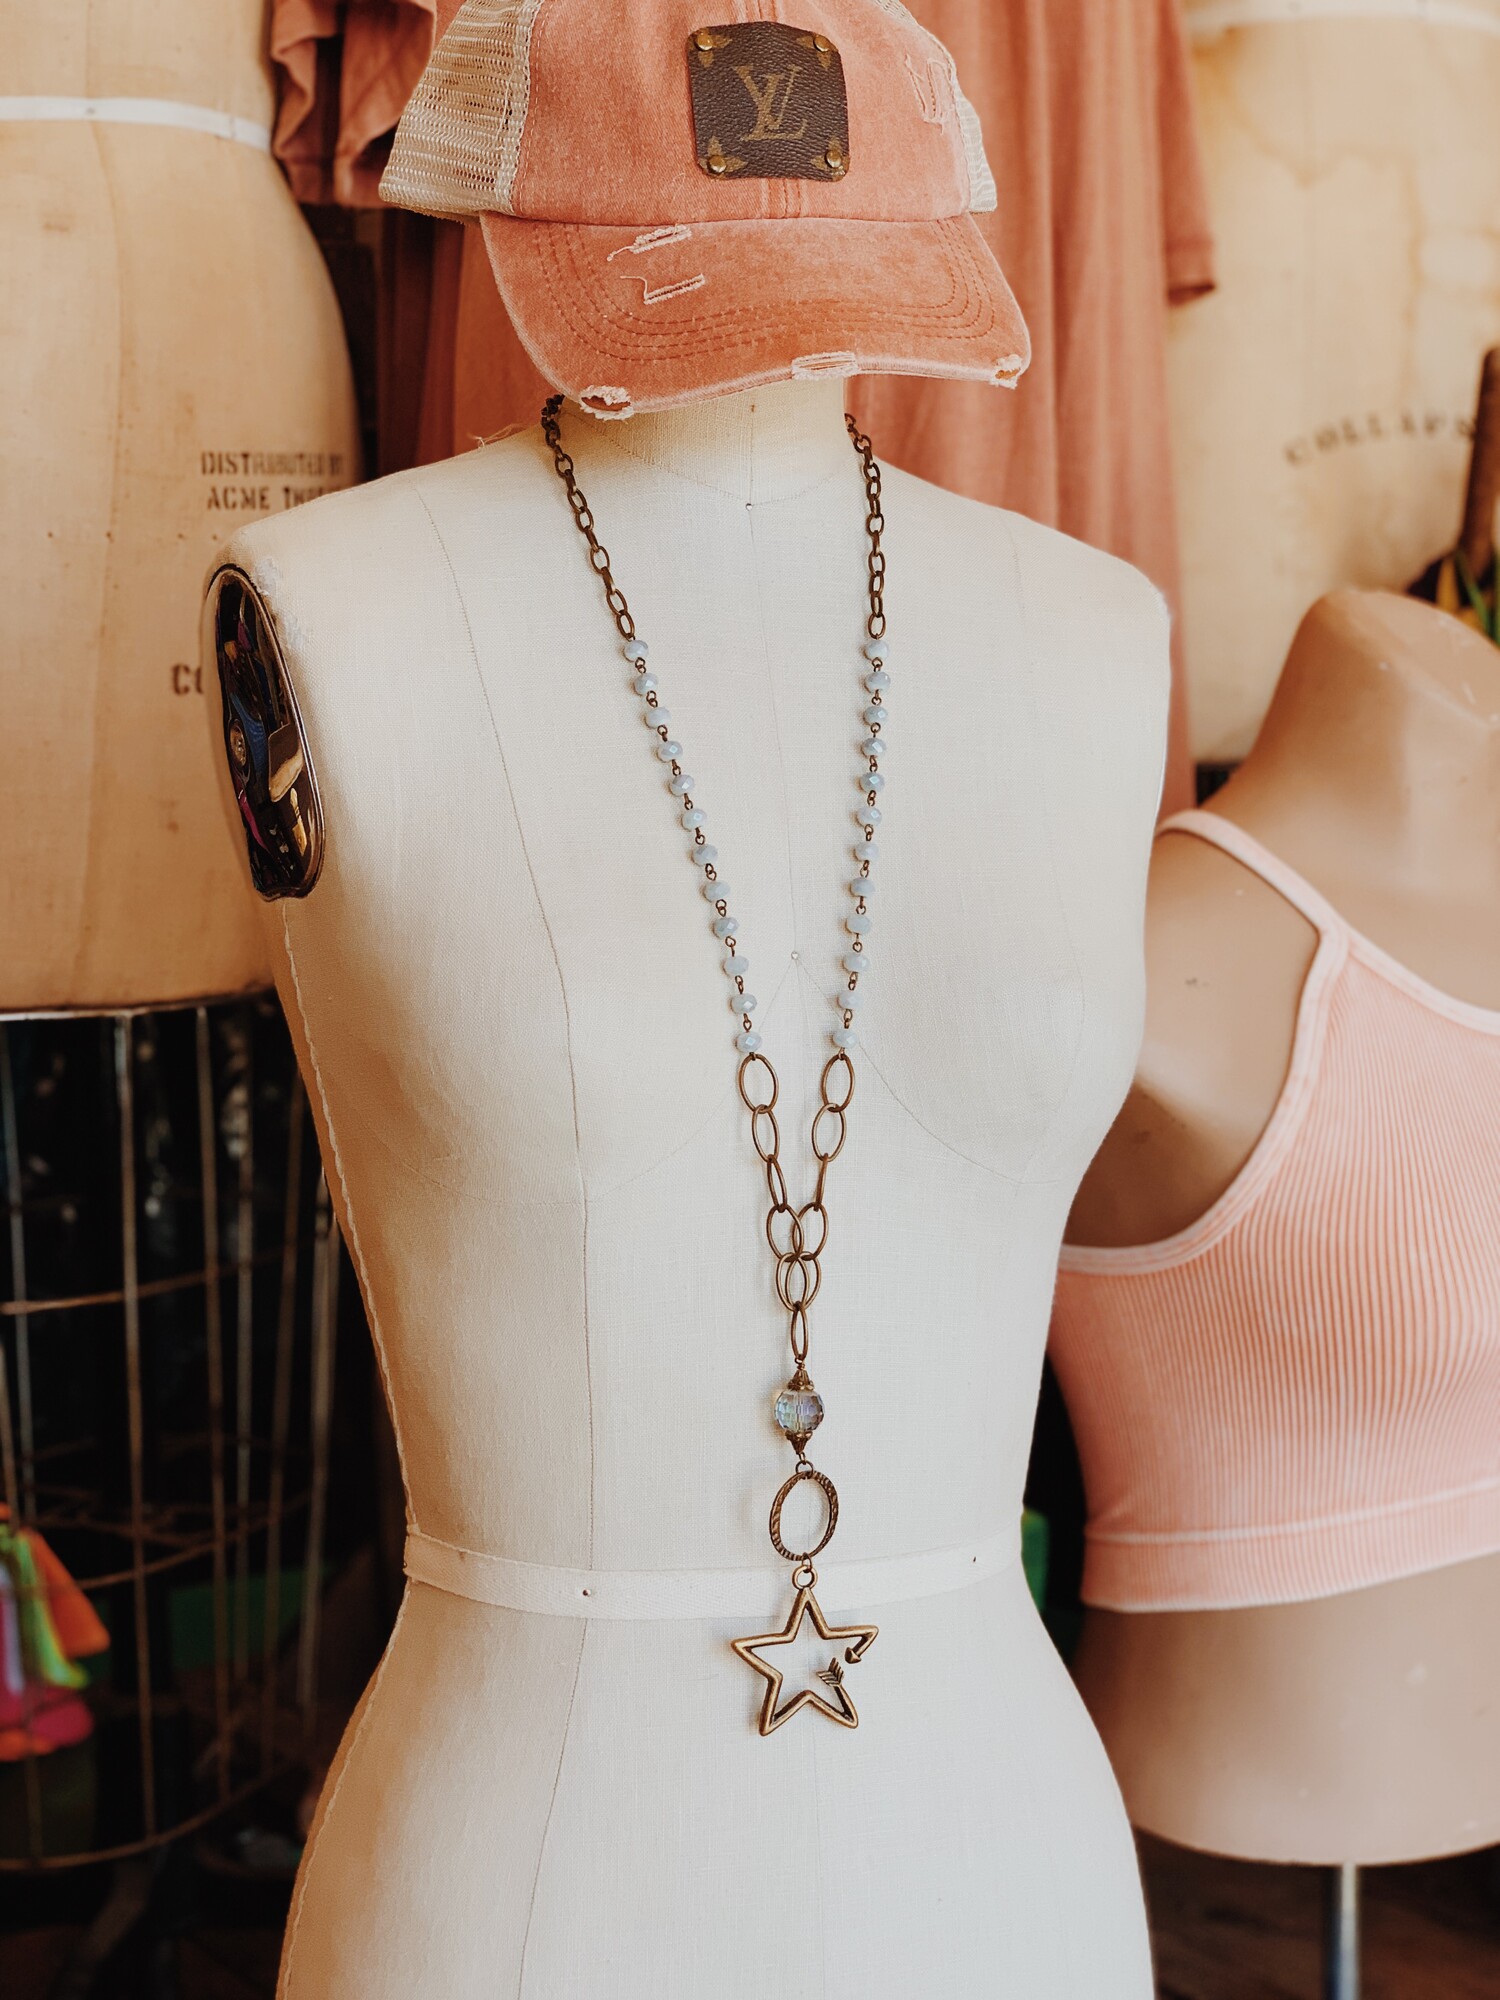 This handmade necklace is on a 32 inch chain made of multiple chain types! The pendant is a gorgeous arrow in the shape of a star!